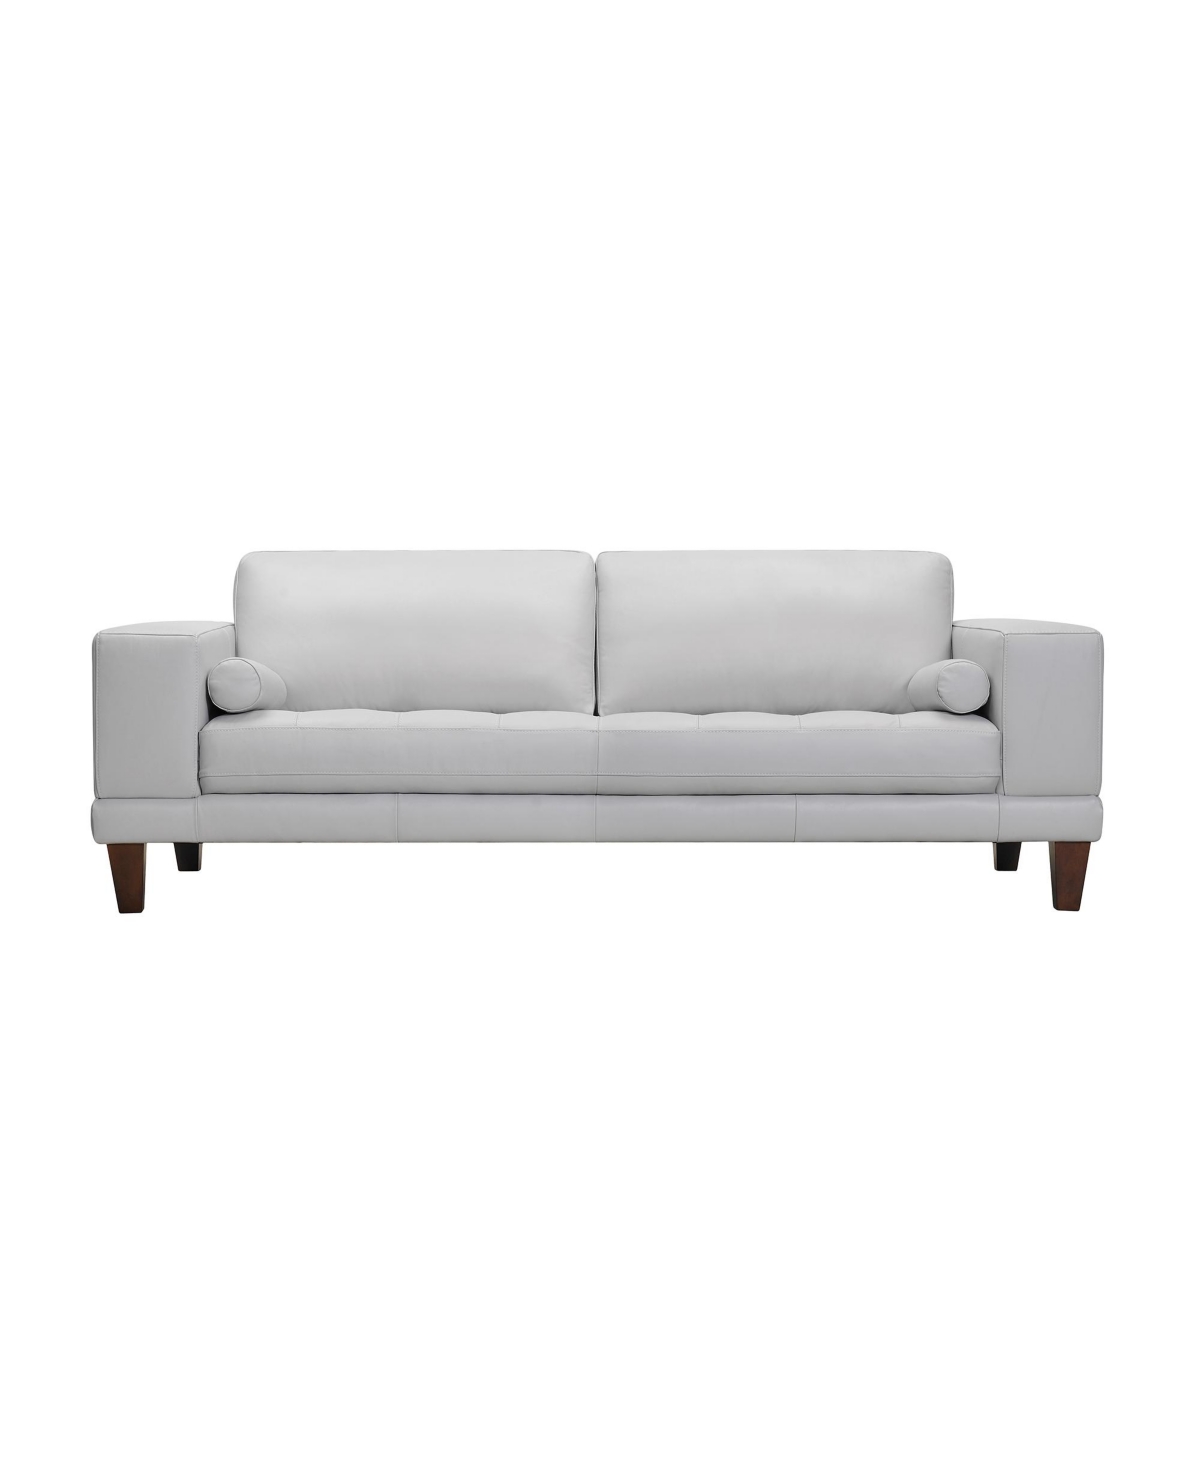 Armen Living Wynne 94" Genuine Leather With Wood Legs In Contemporary Sofa In Dove Gray